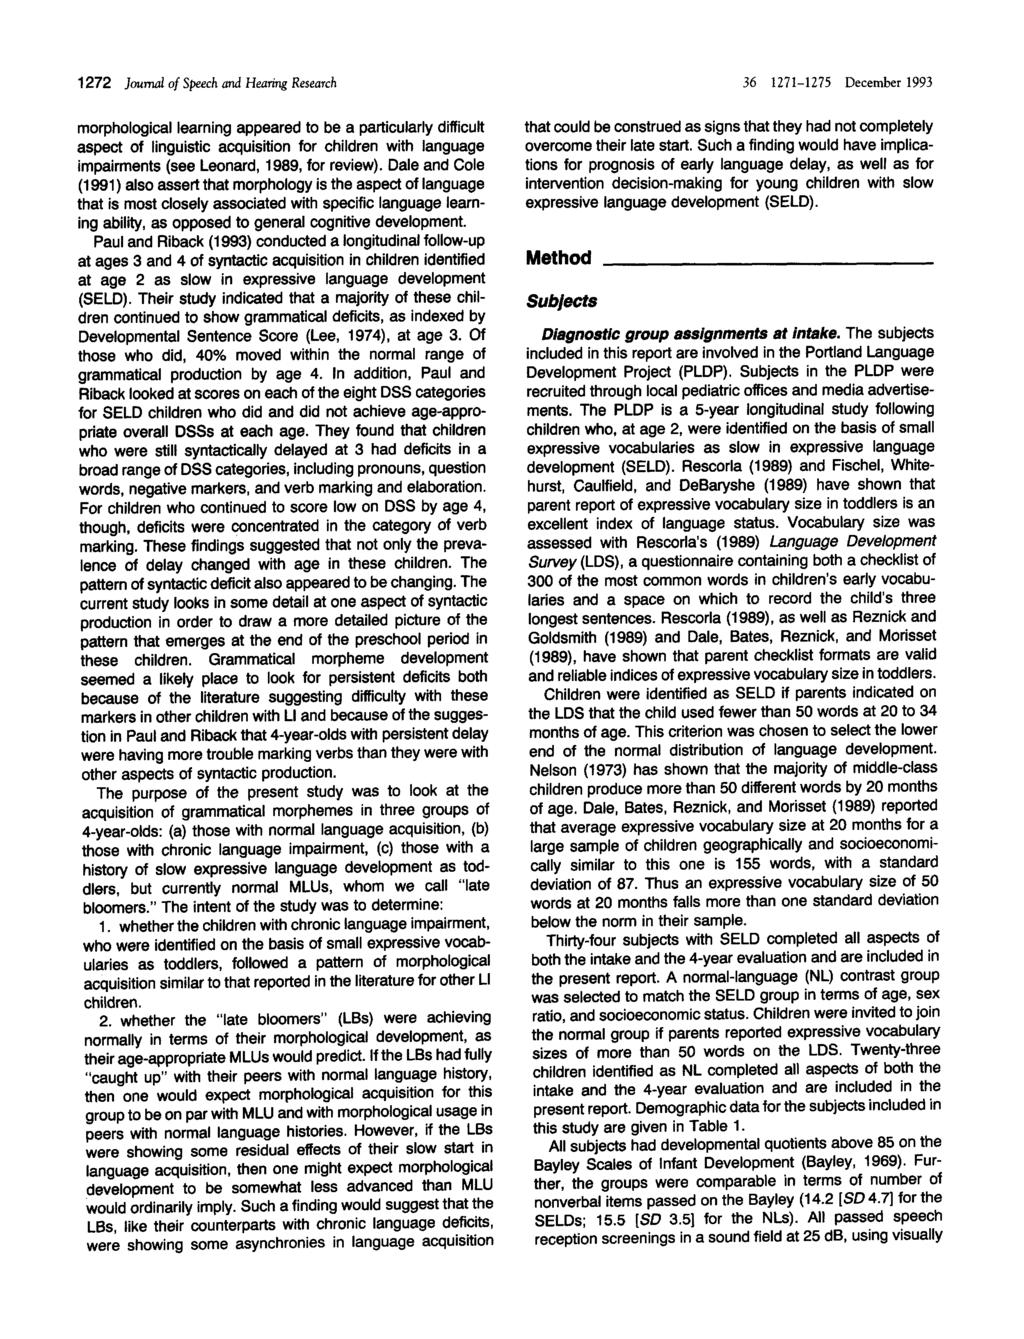 1272 Journal of Speech and Hearing Research morphological learning appeared to be a particularly difficult aspect of linguistic acquisition for children with language impairments (see Leonard, 1989,